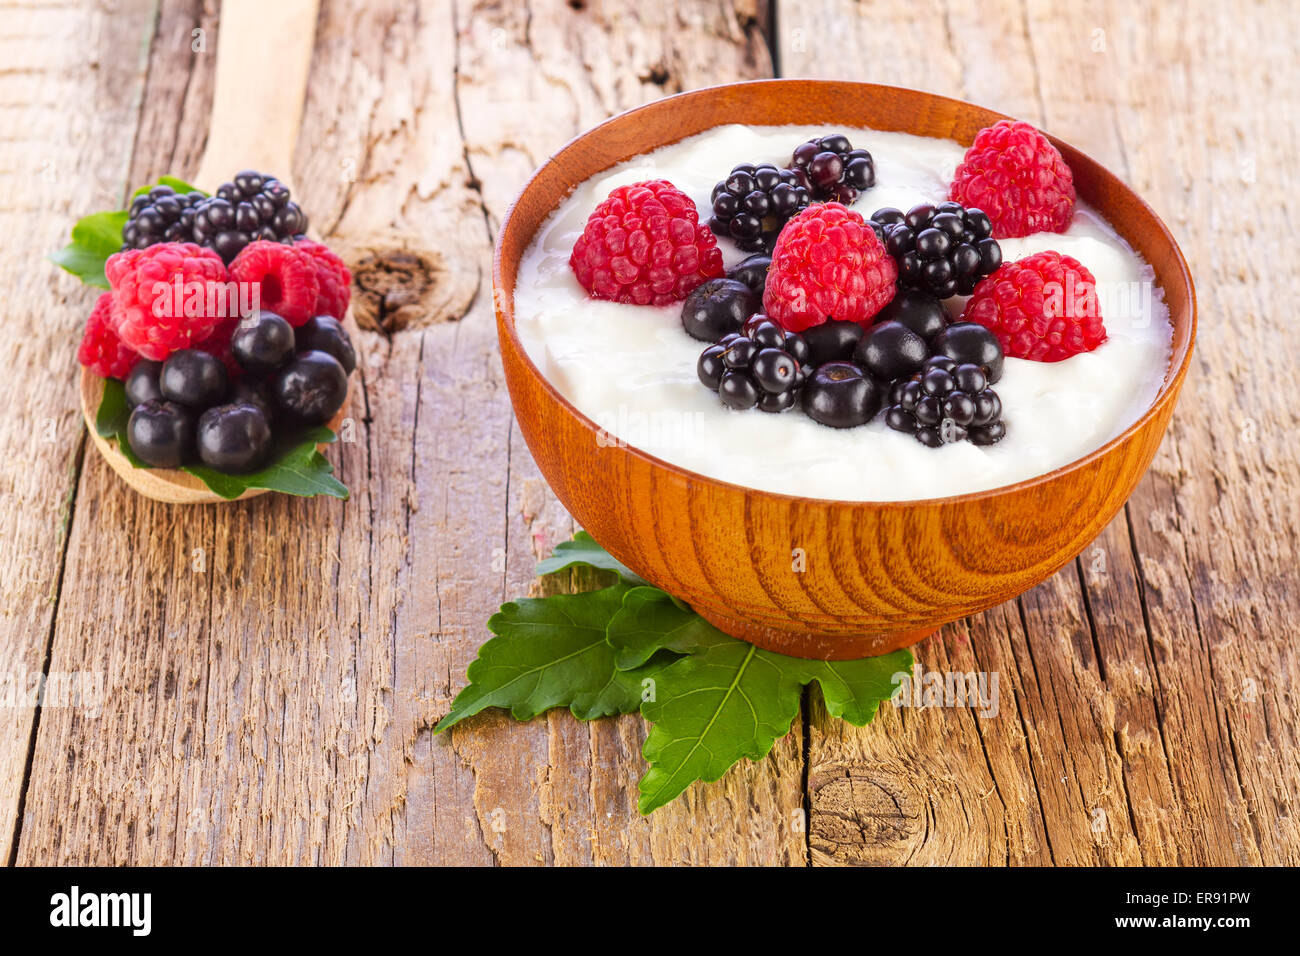 yogurt with wild berries in wooden bowl on wooden background Stock Photo